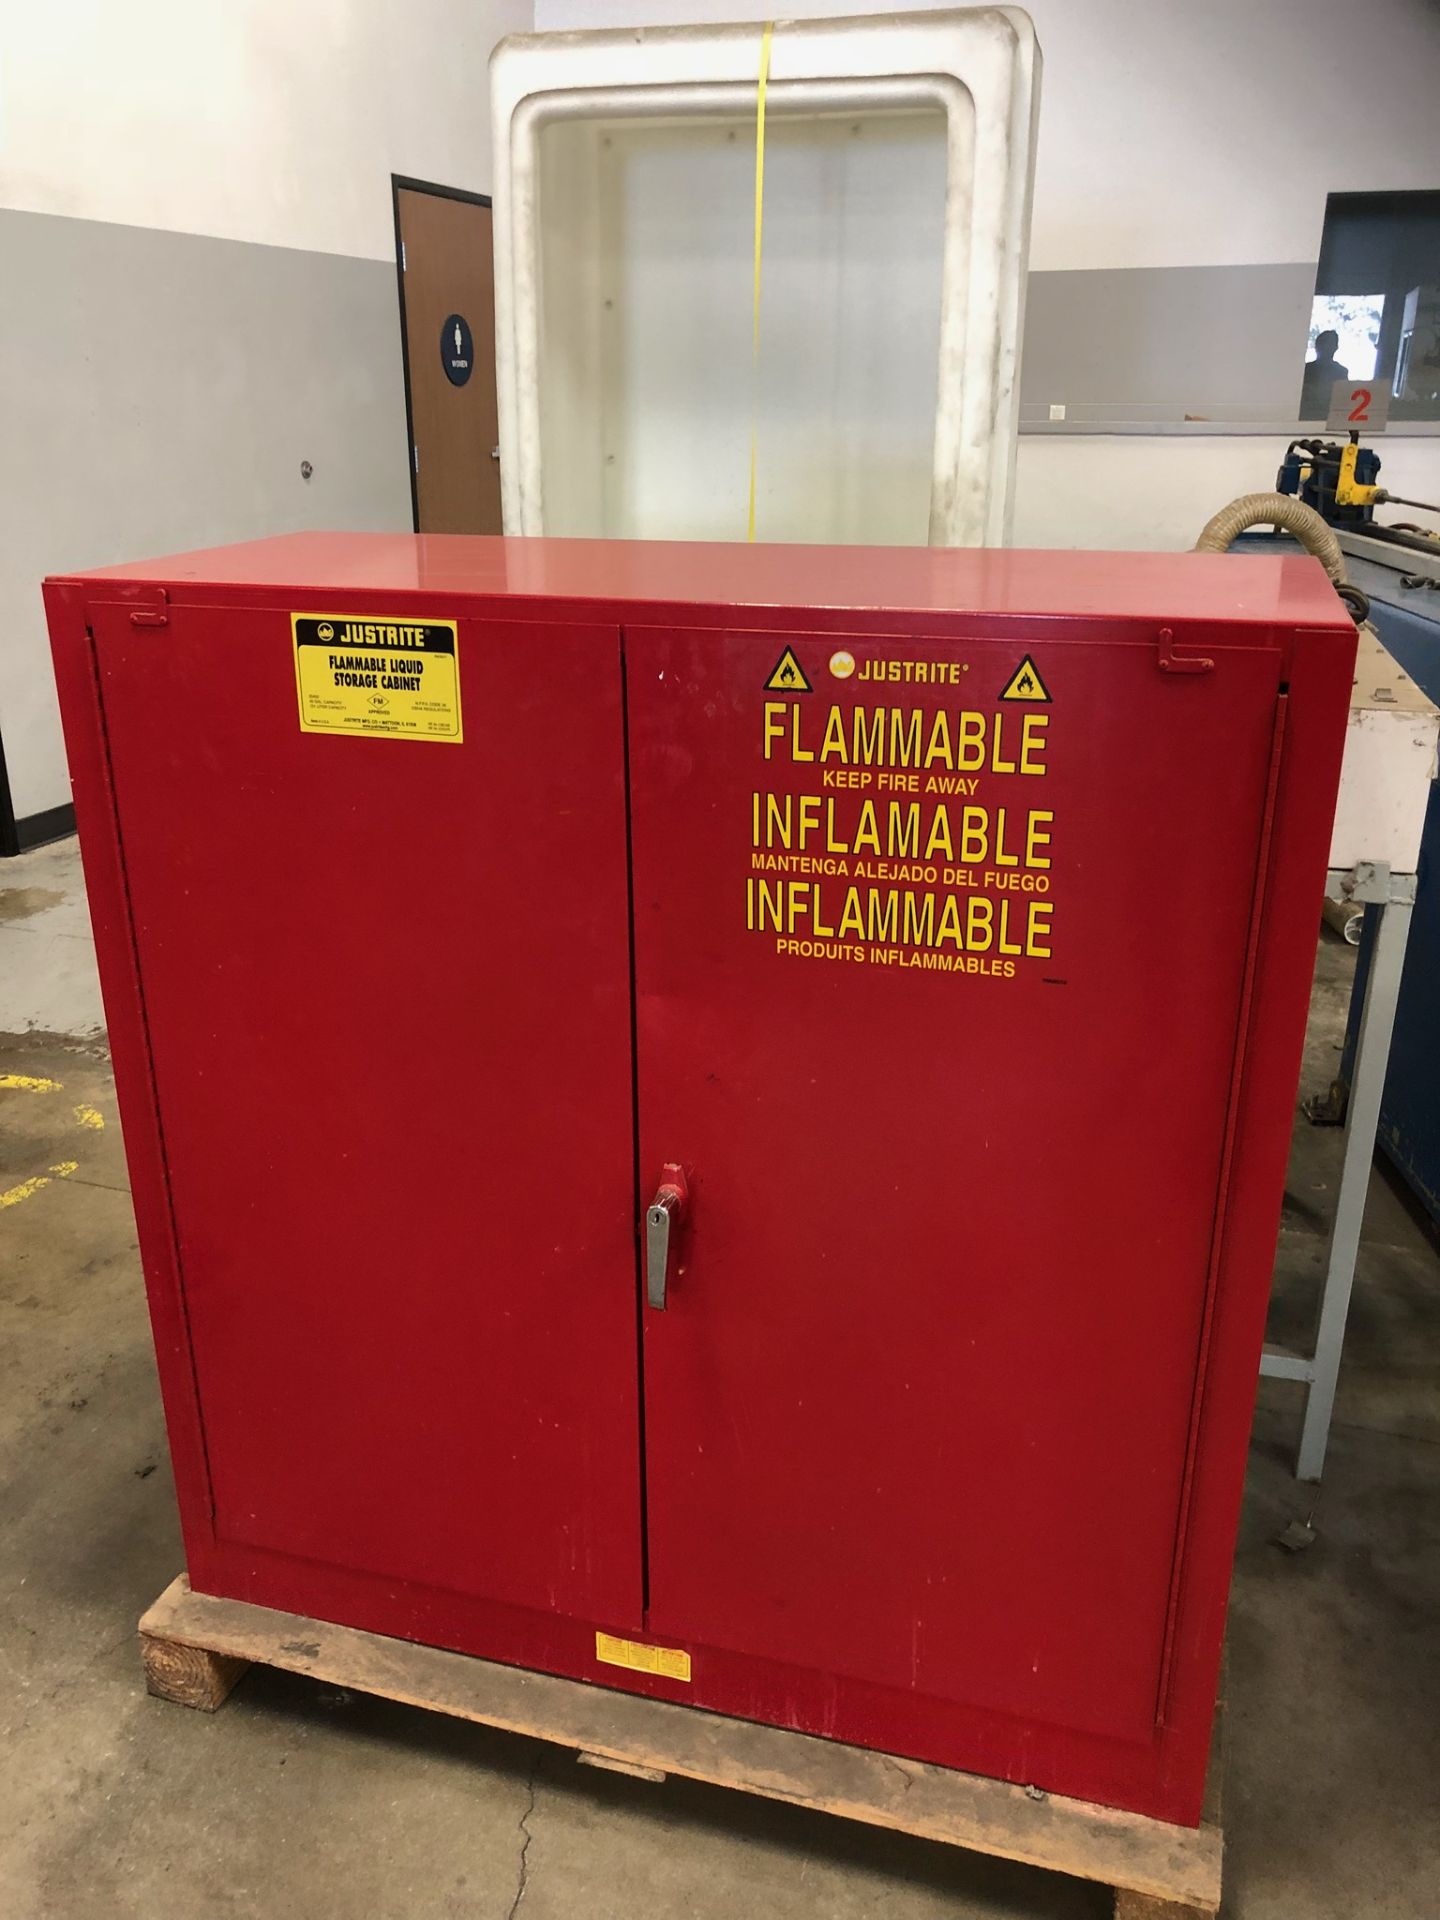 Justright Flammable Cabinet